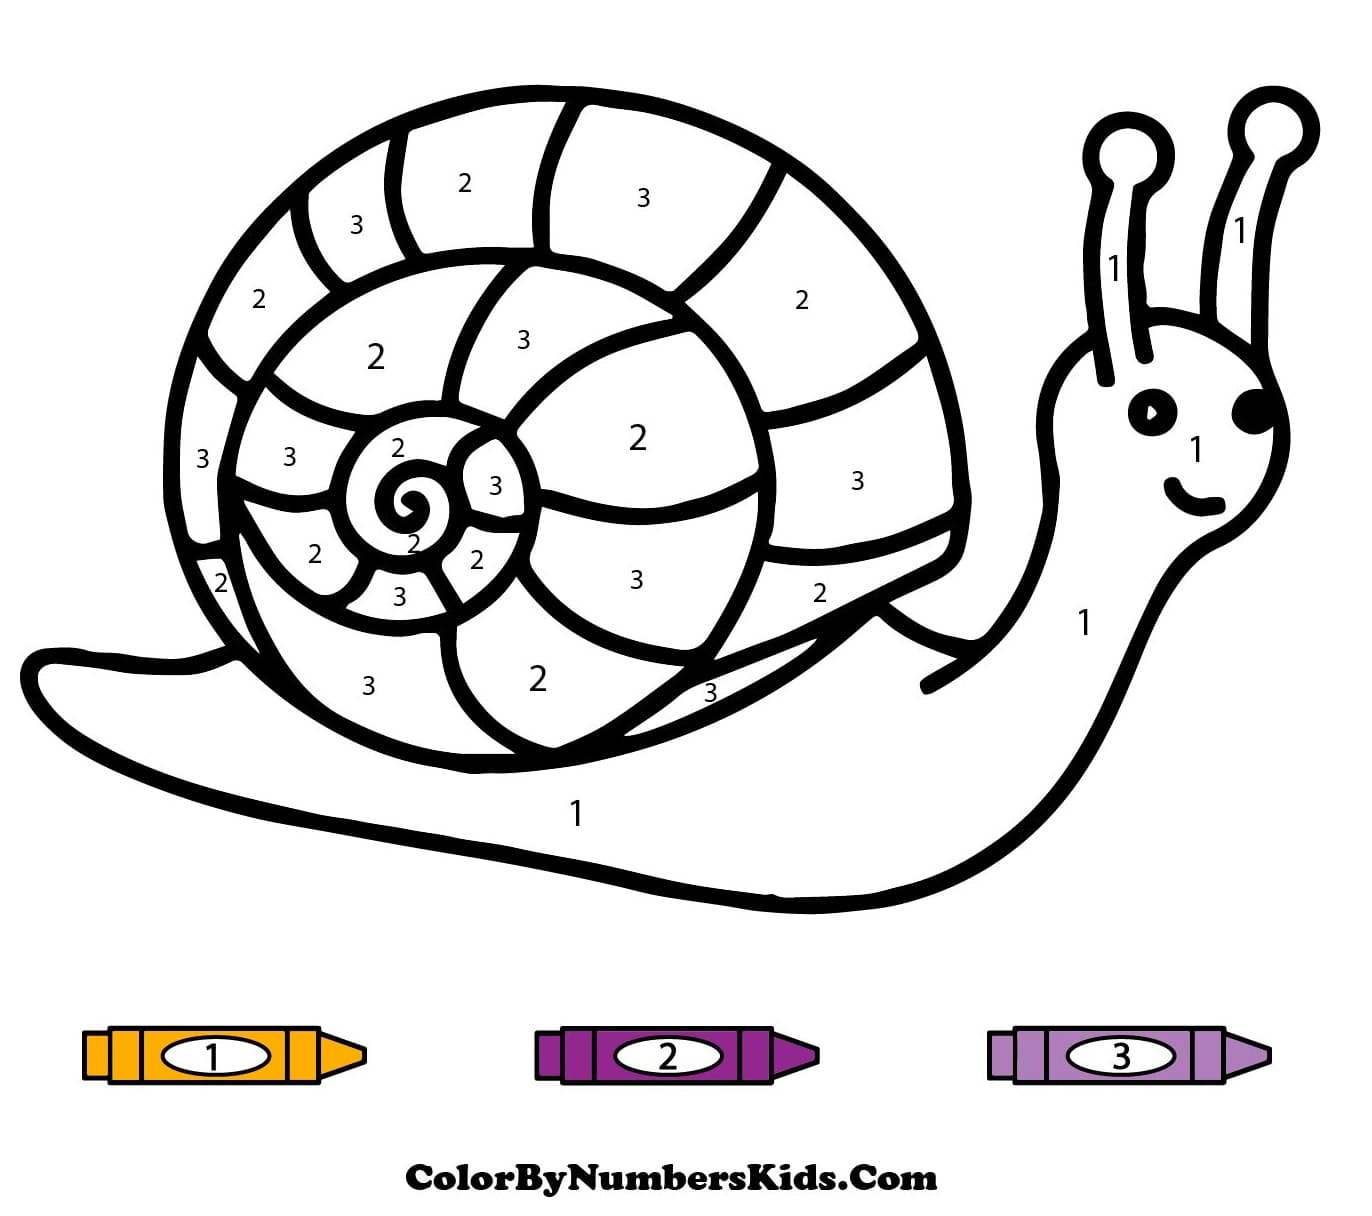 Snail Color By Number For Kid